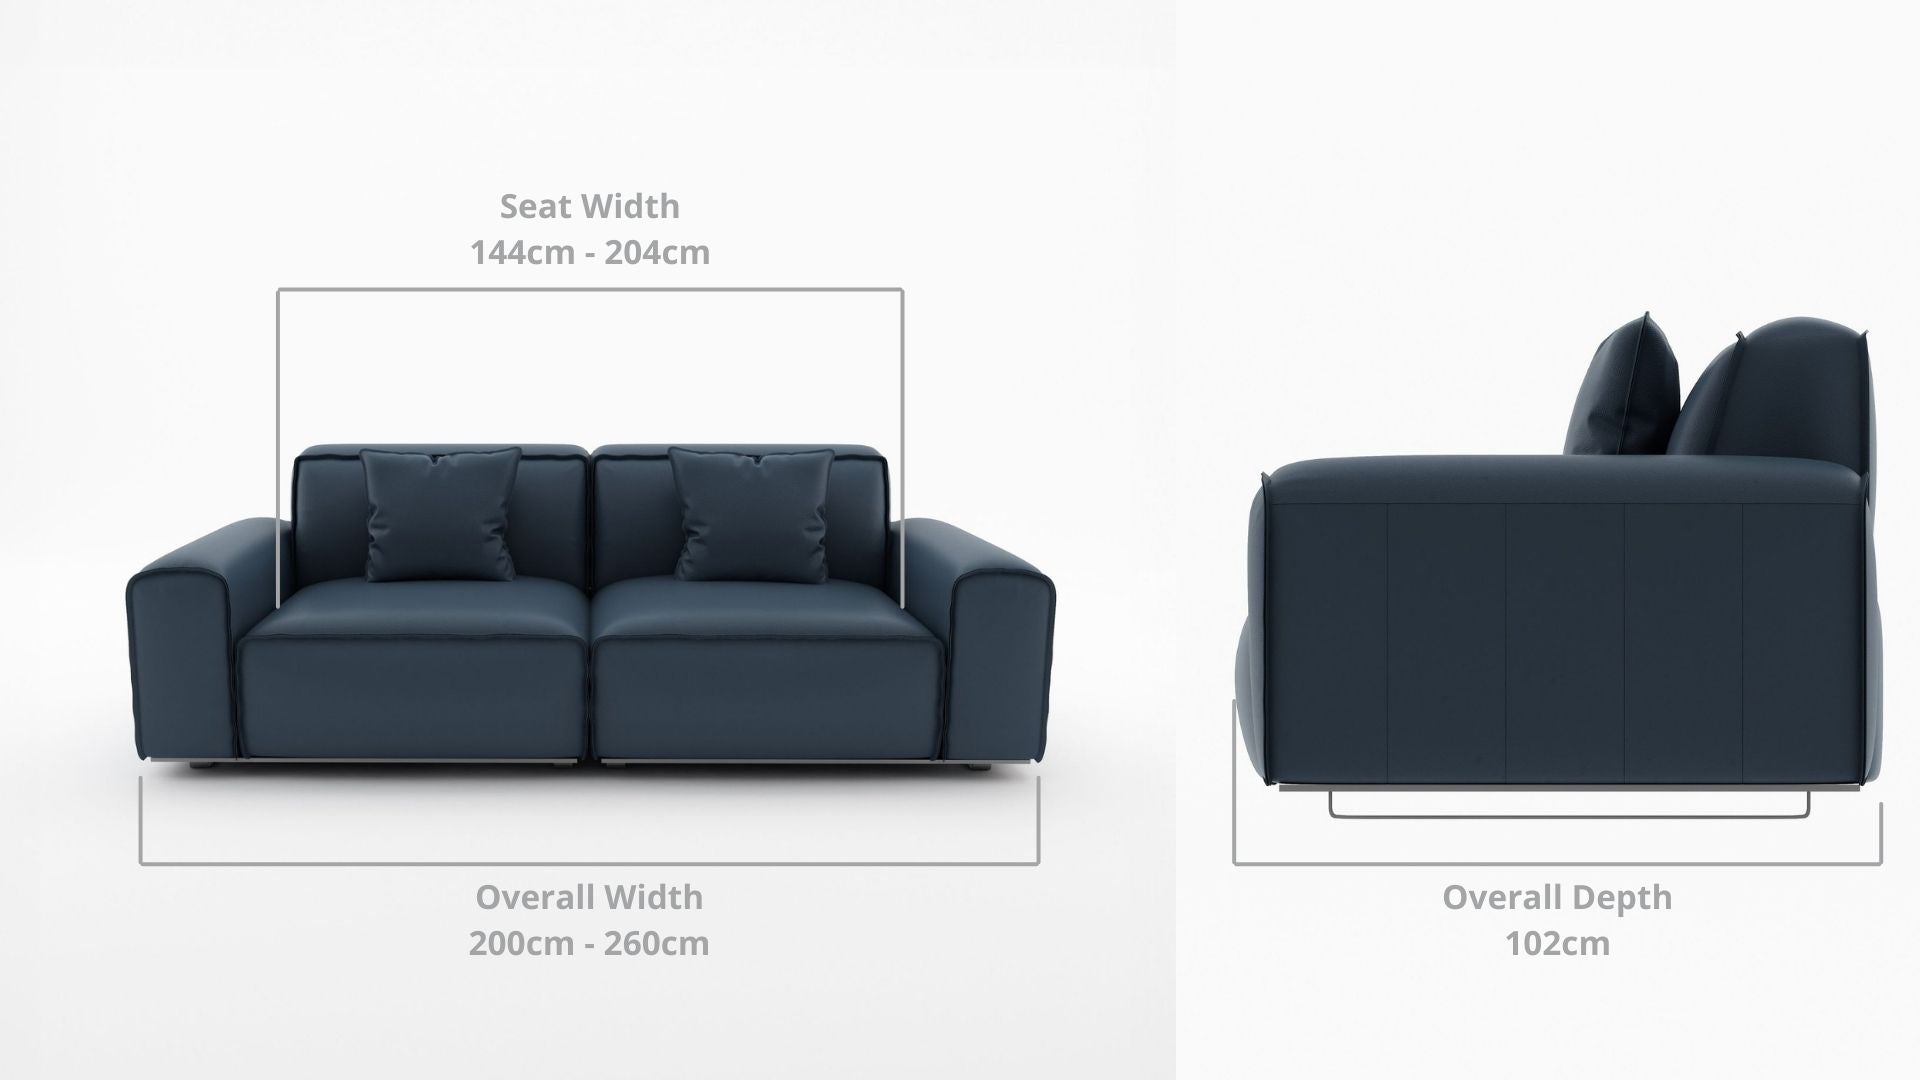 Details the key dimensions in terms of overall width, overall depth and seat width for Colby Full Leather Sofa